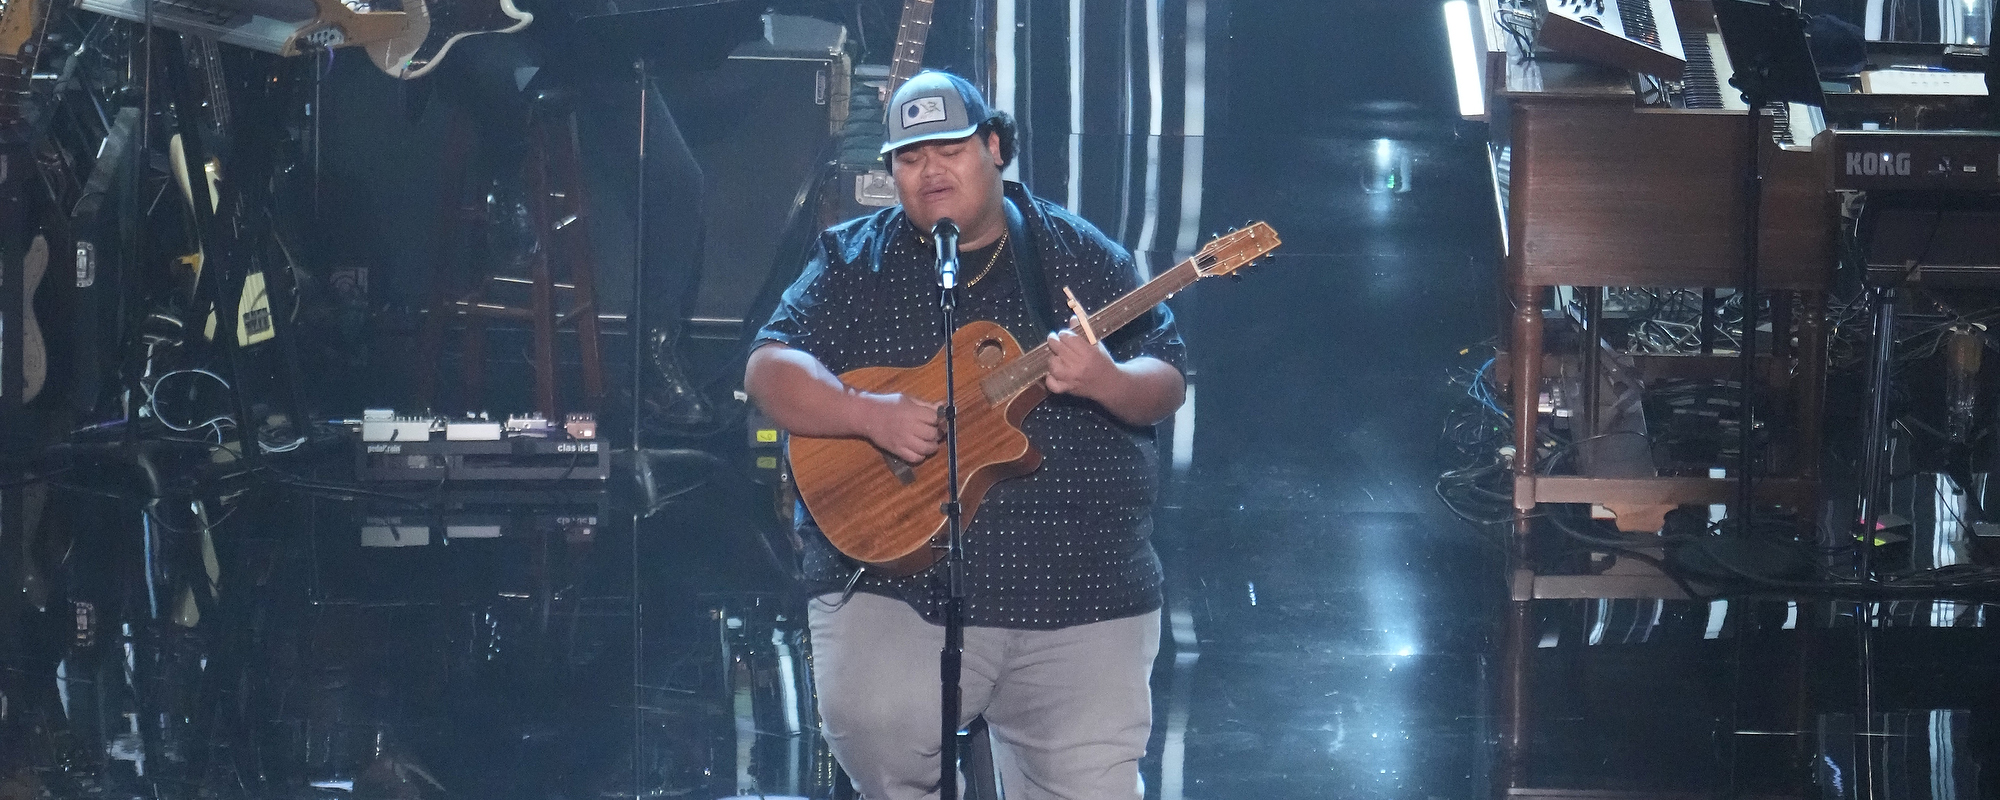 Iam Tongi Notches Spot in Top 24 on ‘American Idol’ with “The Sound of Silence”